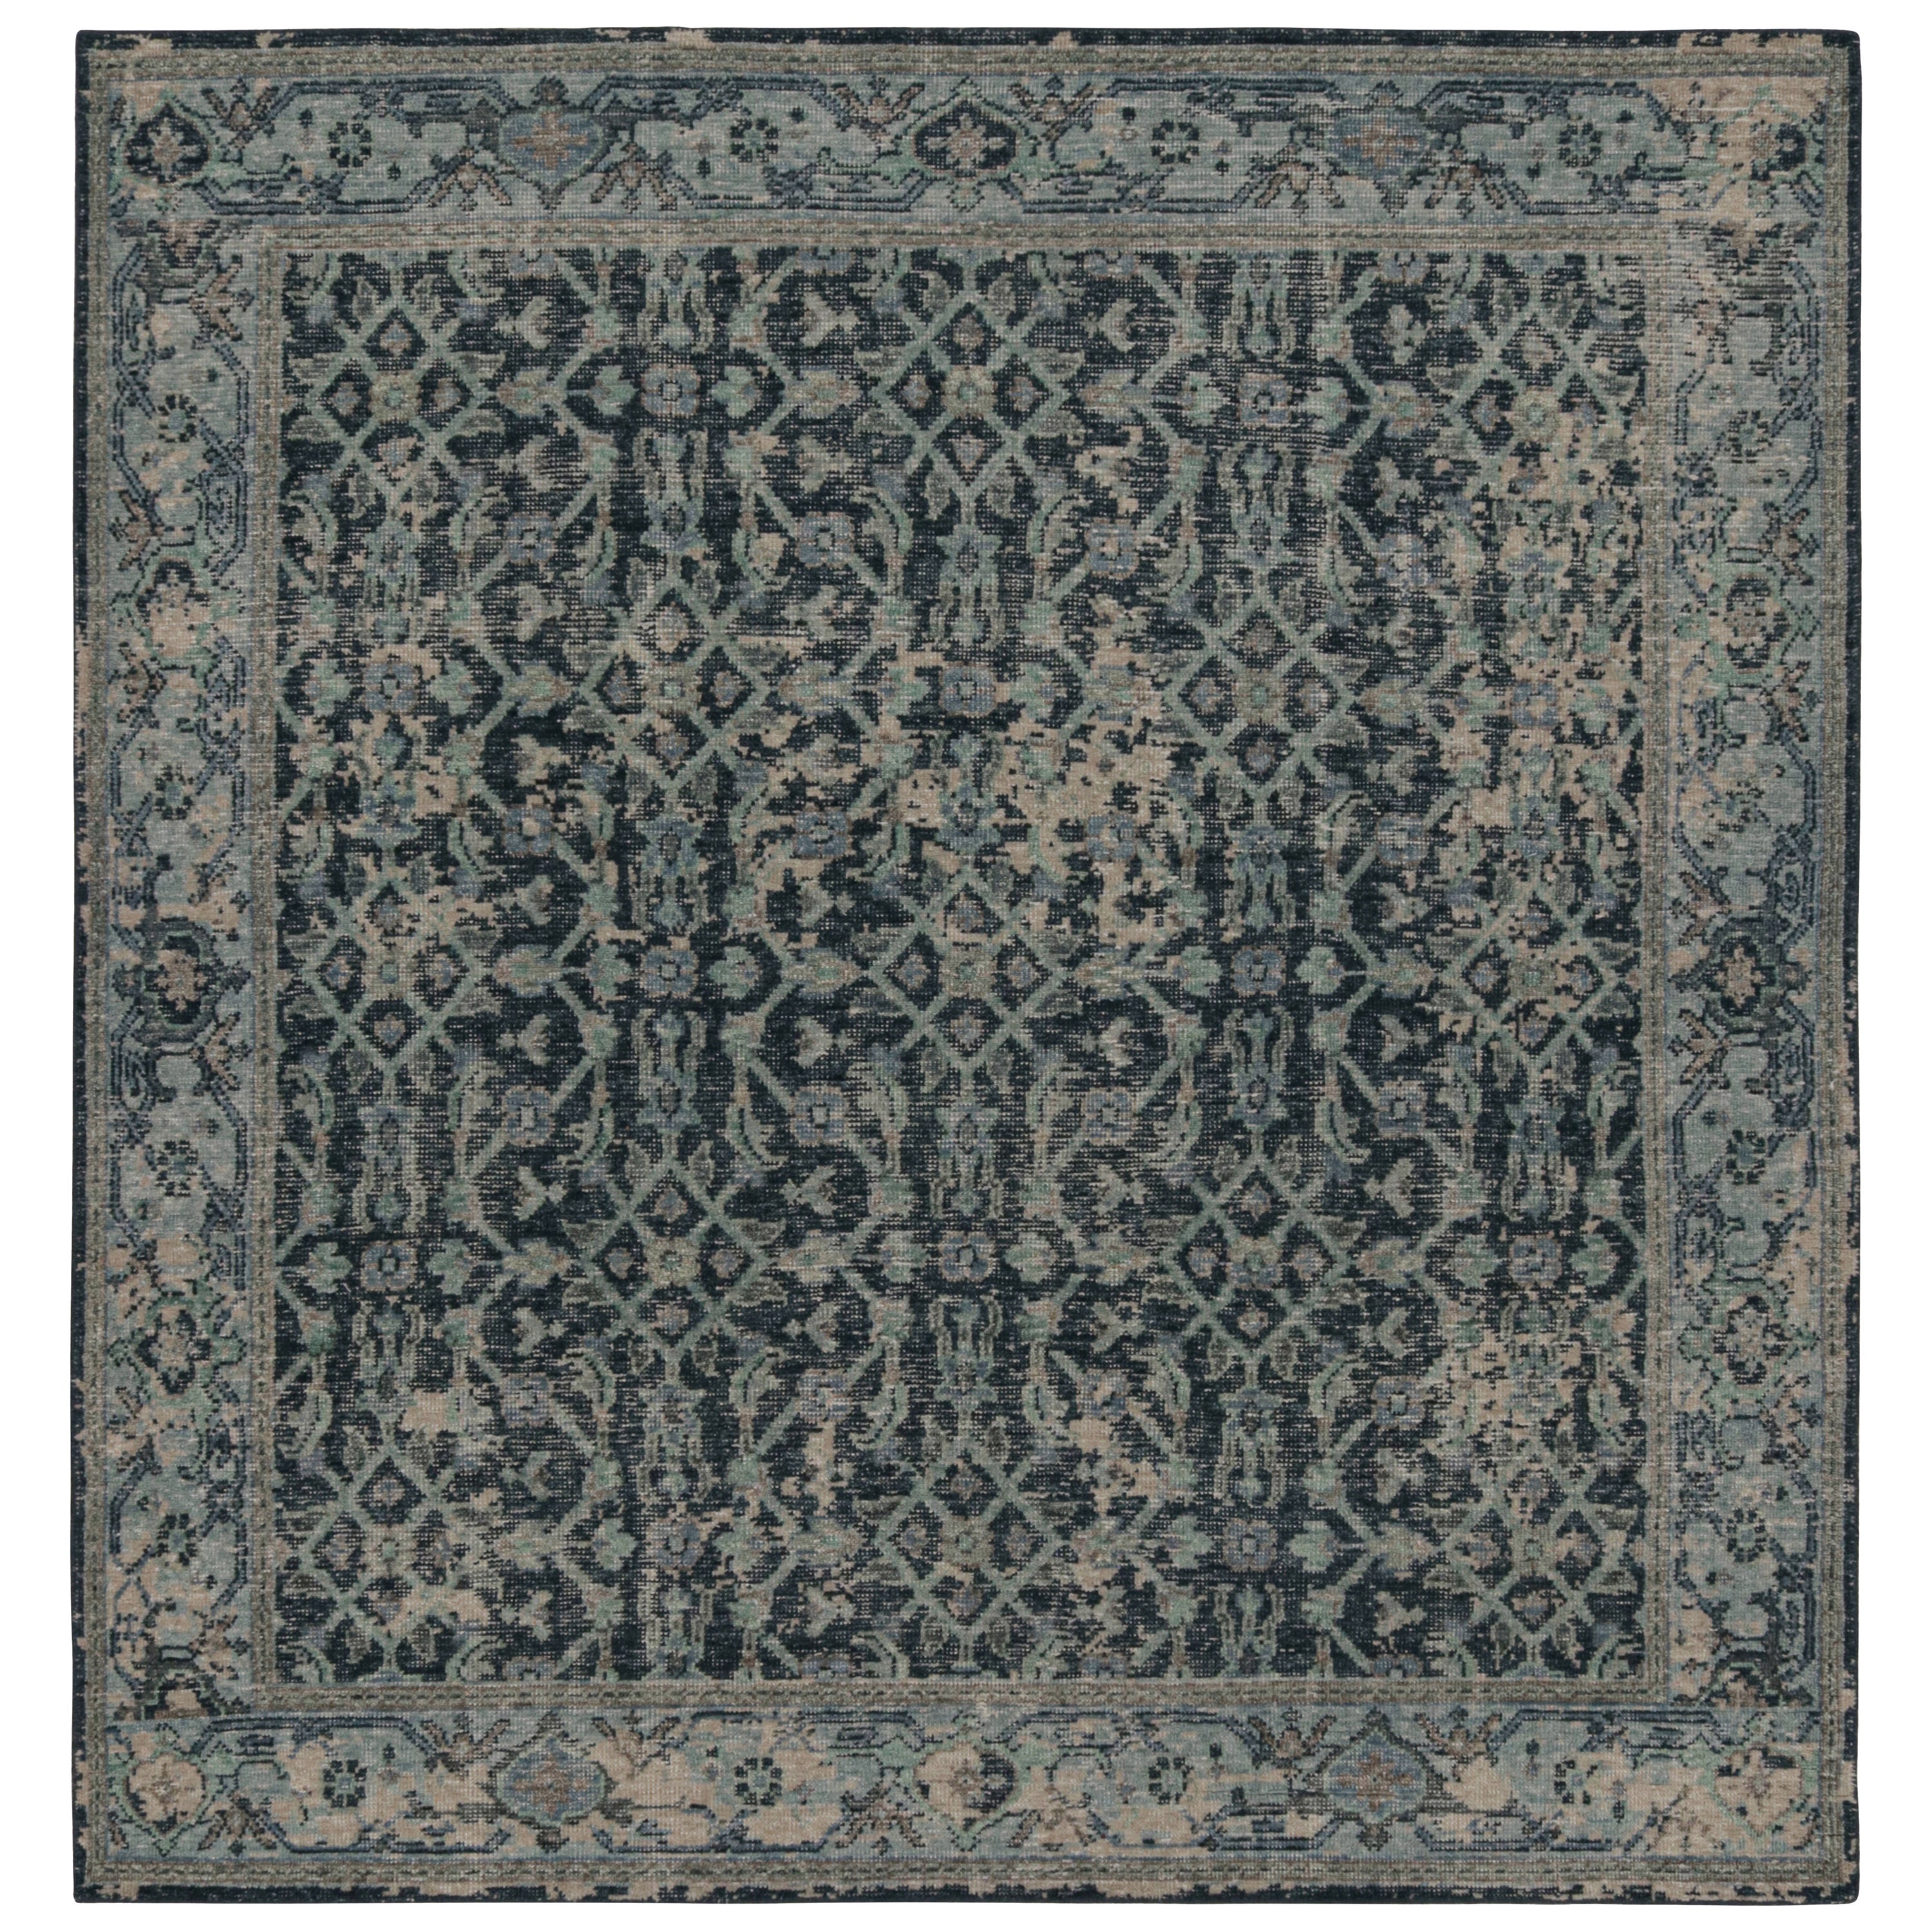 Rug & Kilim’s Distressed Style Rug in Blue with Floral Patterns